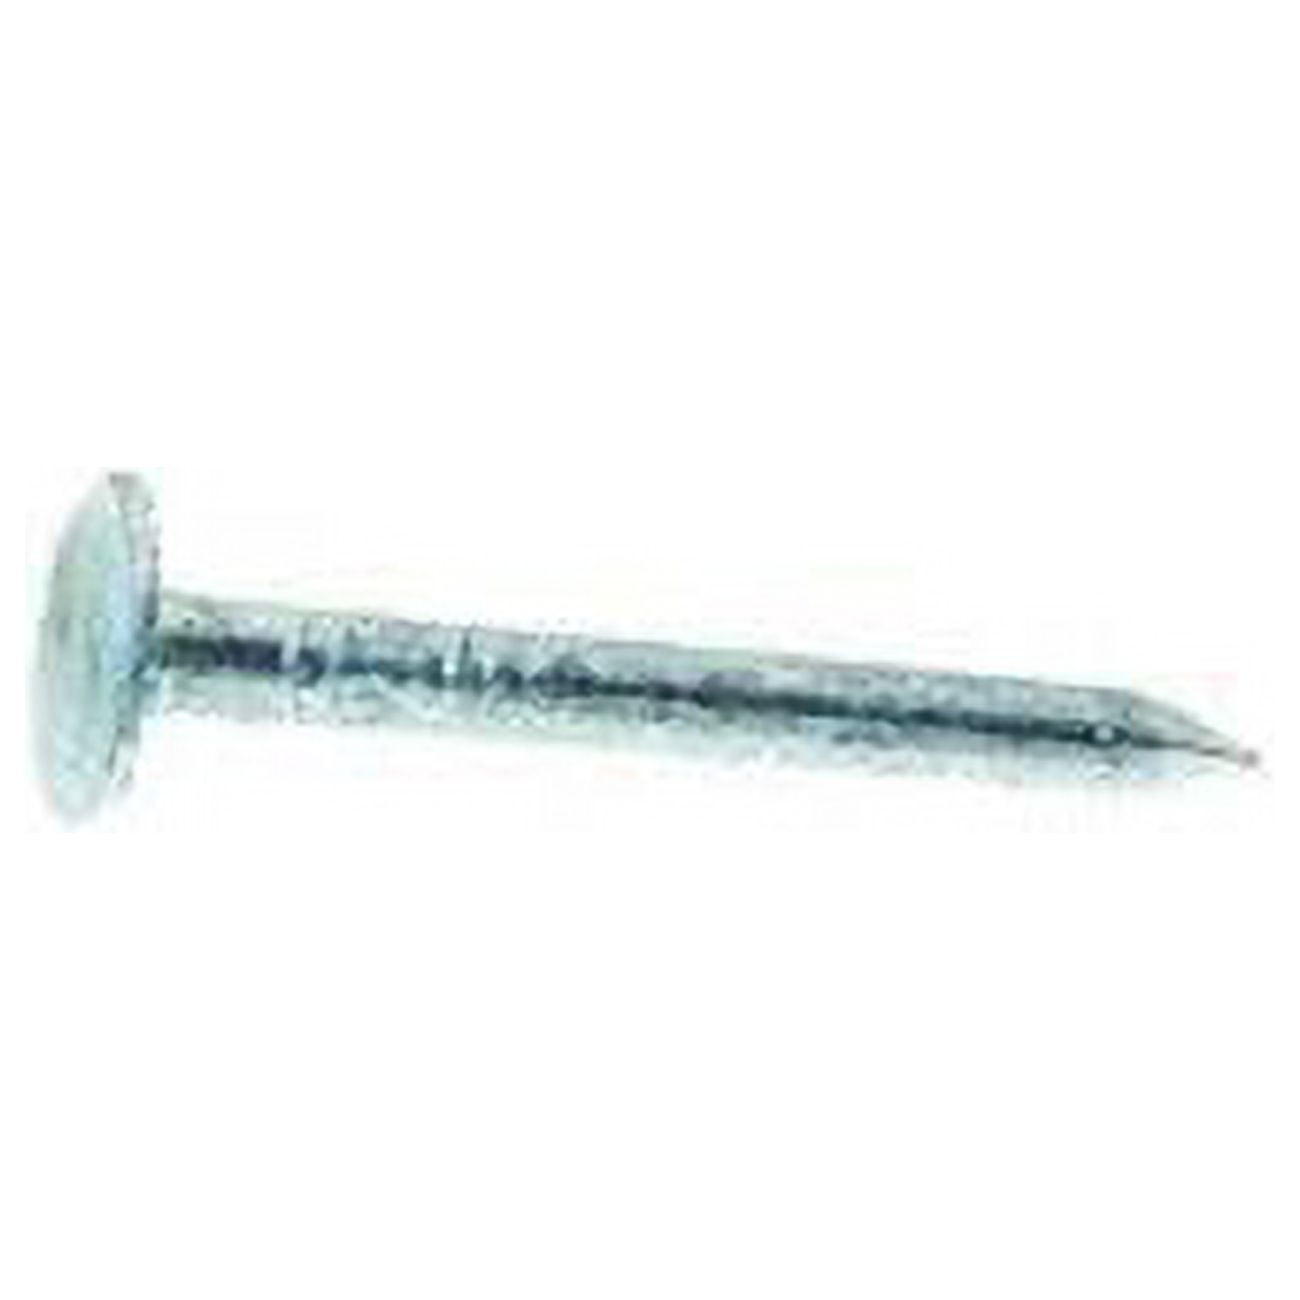 Picture of Grip-Rite 5025237 0.75 in. 1 lbs Roofing Hot-Dipped Galvanized Steel Nail with Smooth Flat Shank - Pack of 12